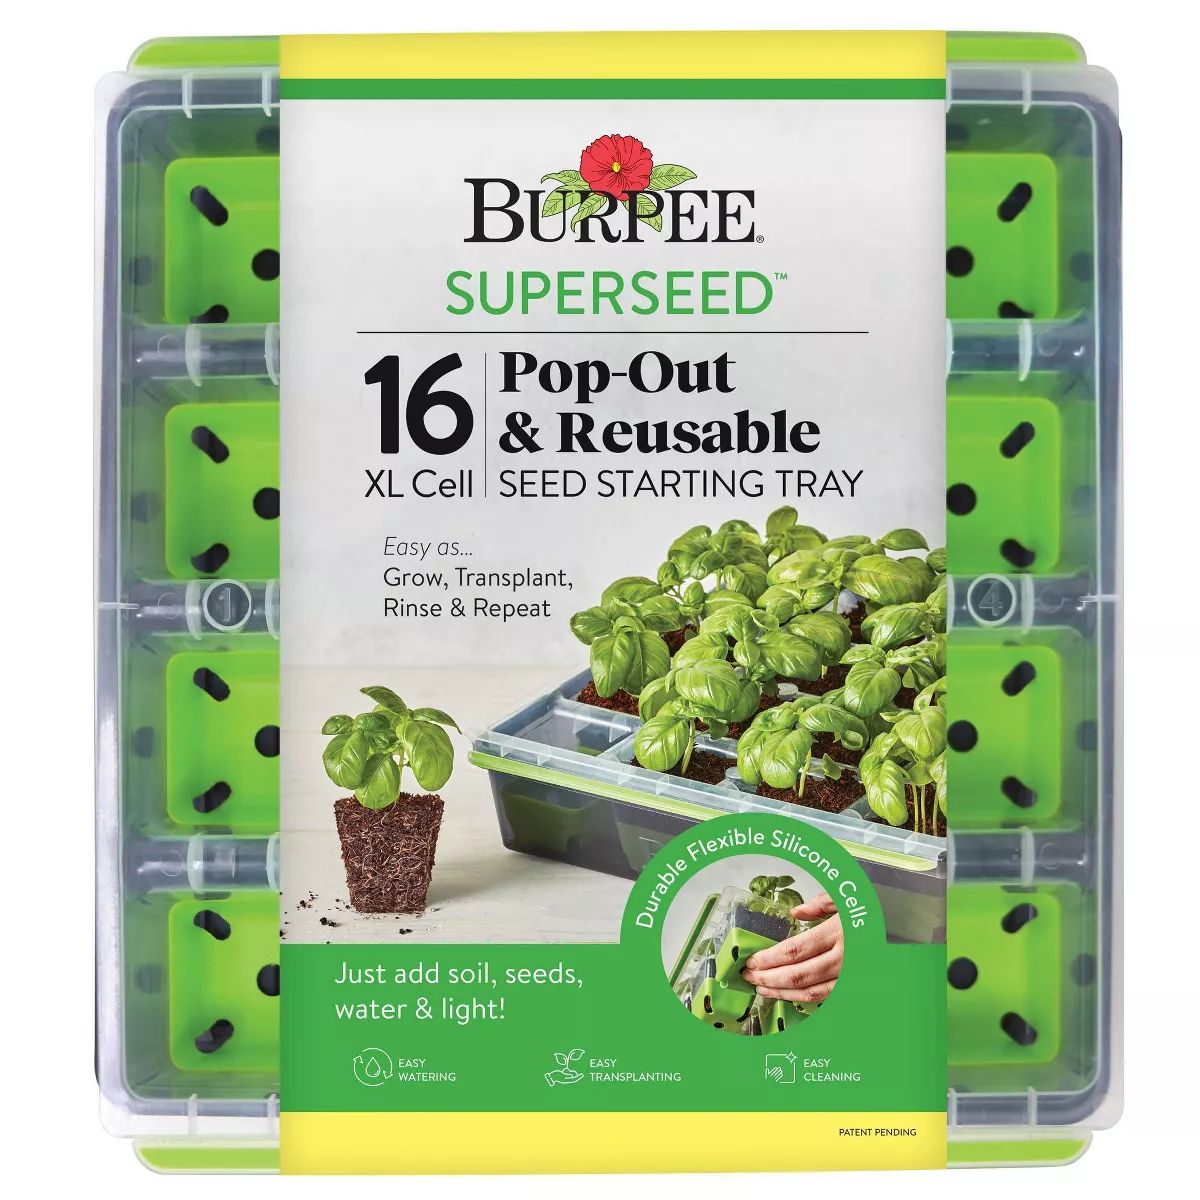 Burpee 16 XL Cell SuperSeed Seed Starting Tray | Target